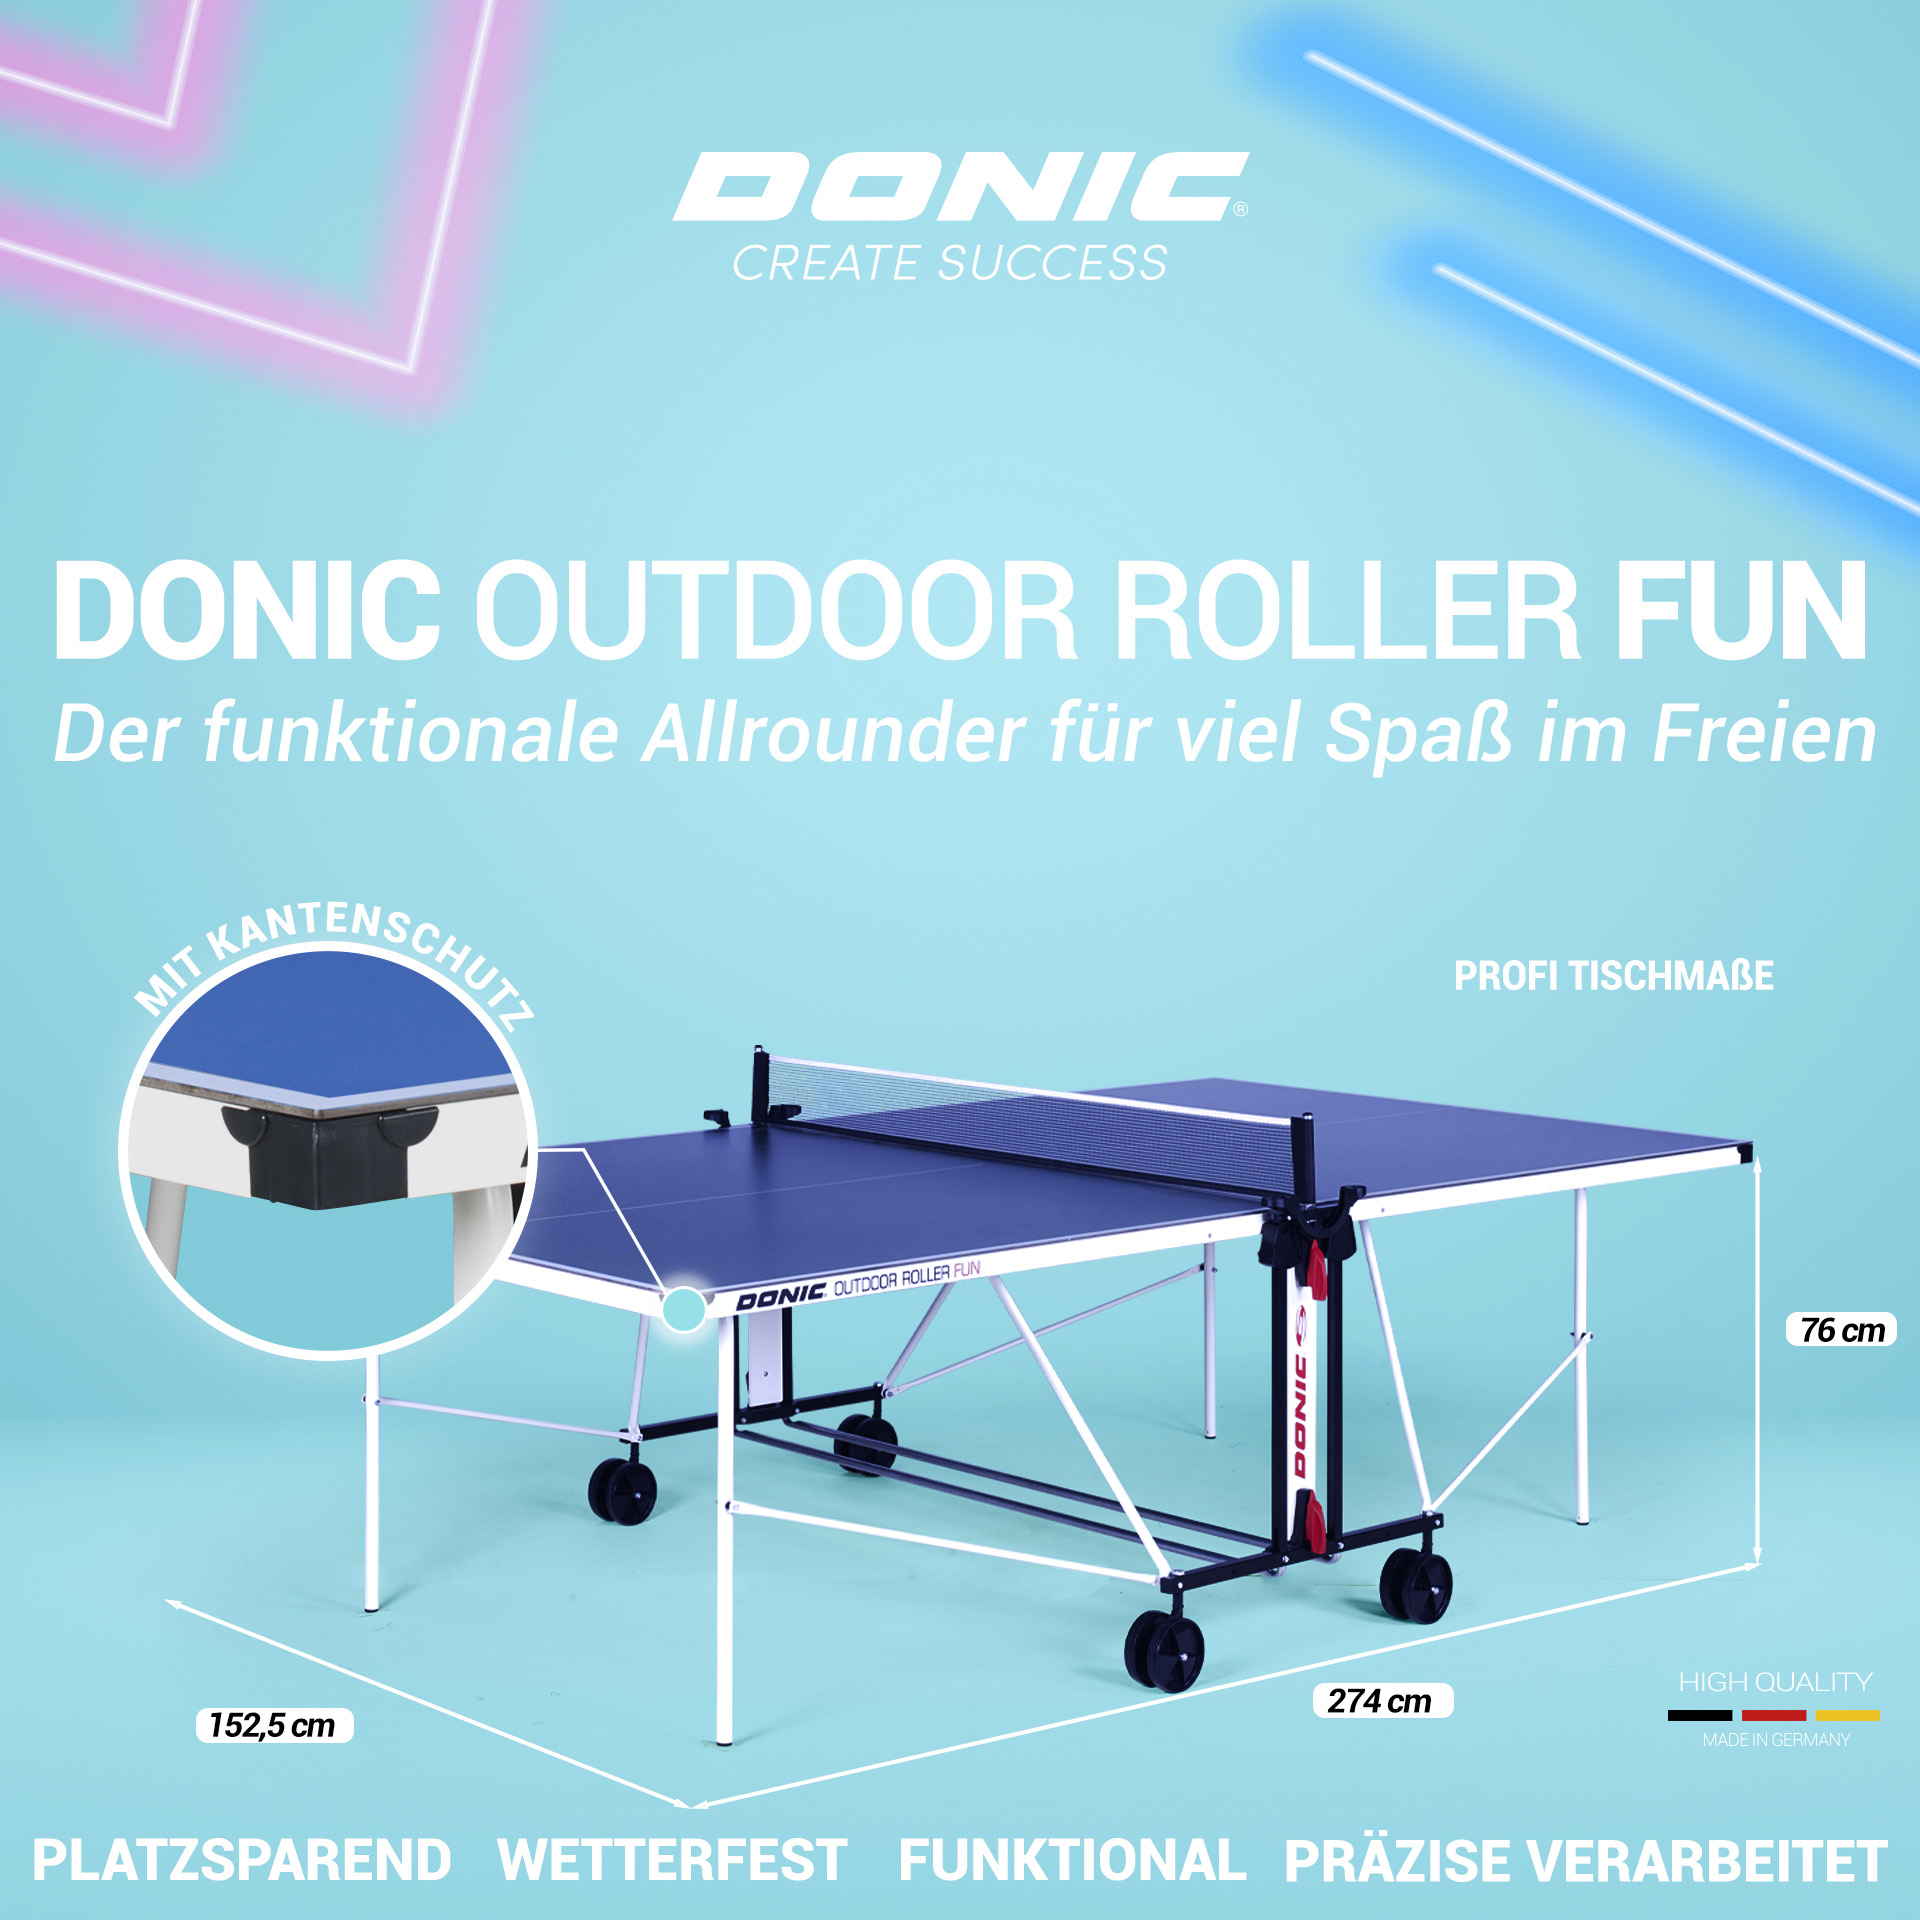 Donic Outdoor Roller Fun